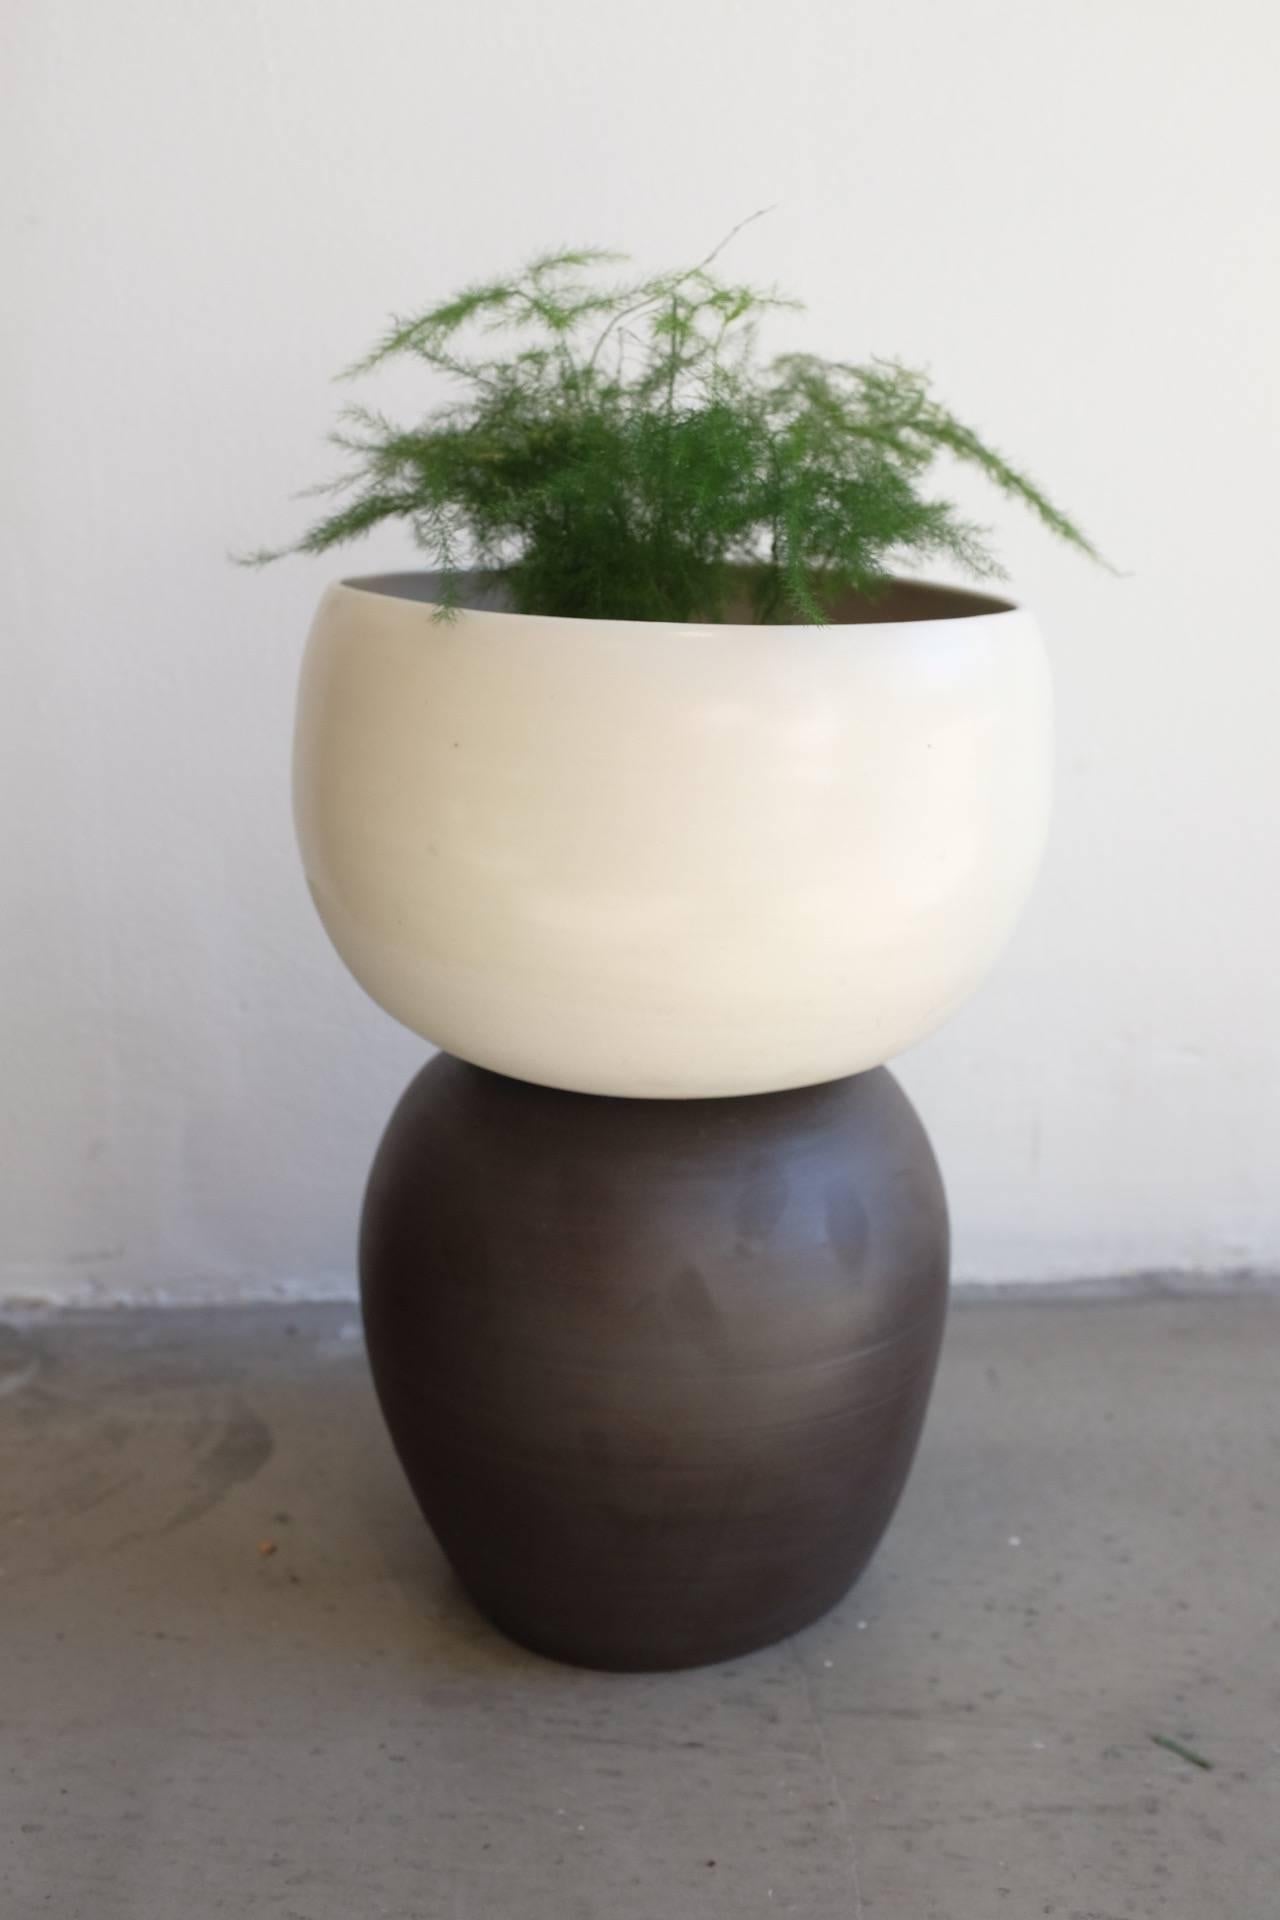 This asymmetrical planter has been hand-thrown and constructed in Brooklyn, NY. Sculptural and oddly shaped, there is a cantilever effect in the appearance. Fired at high temperatures, the porcelain is strong and softly textured. The black half of